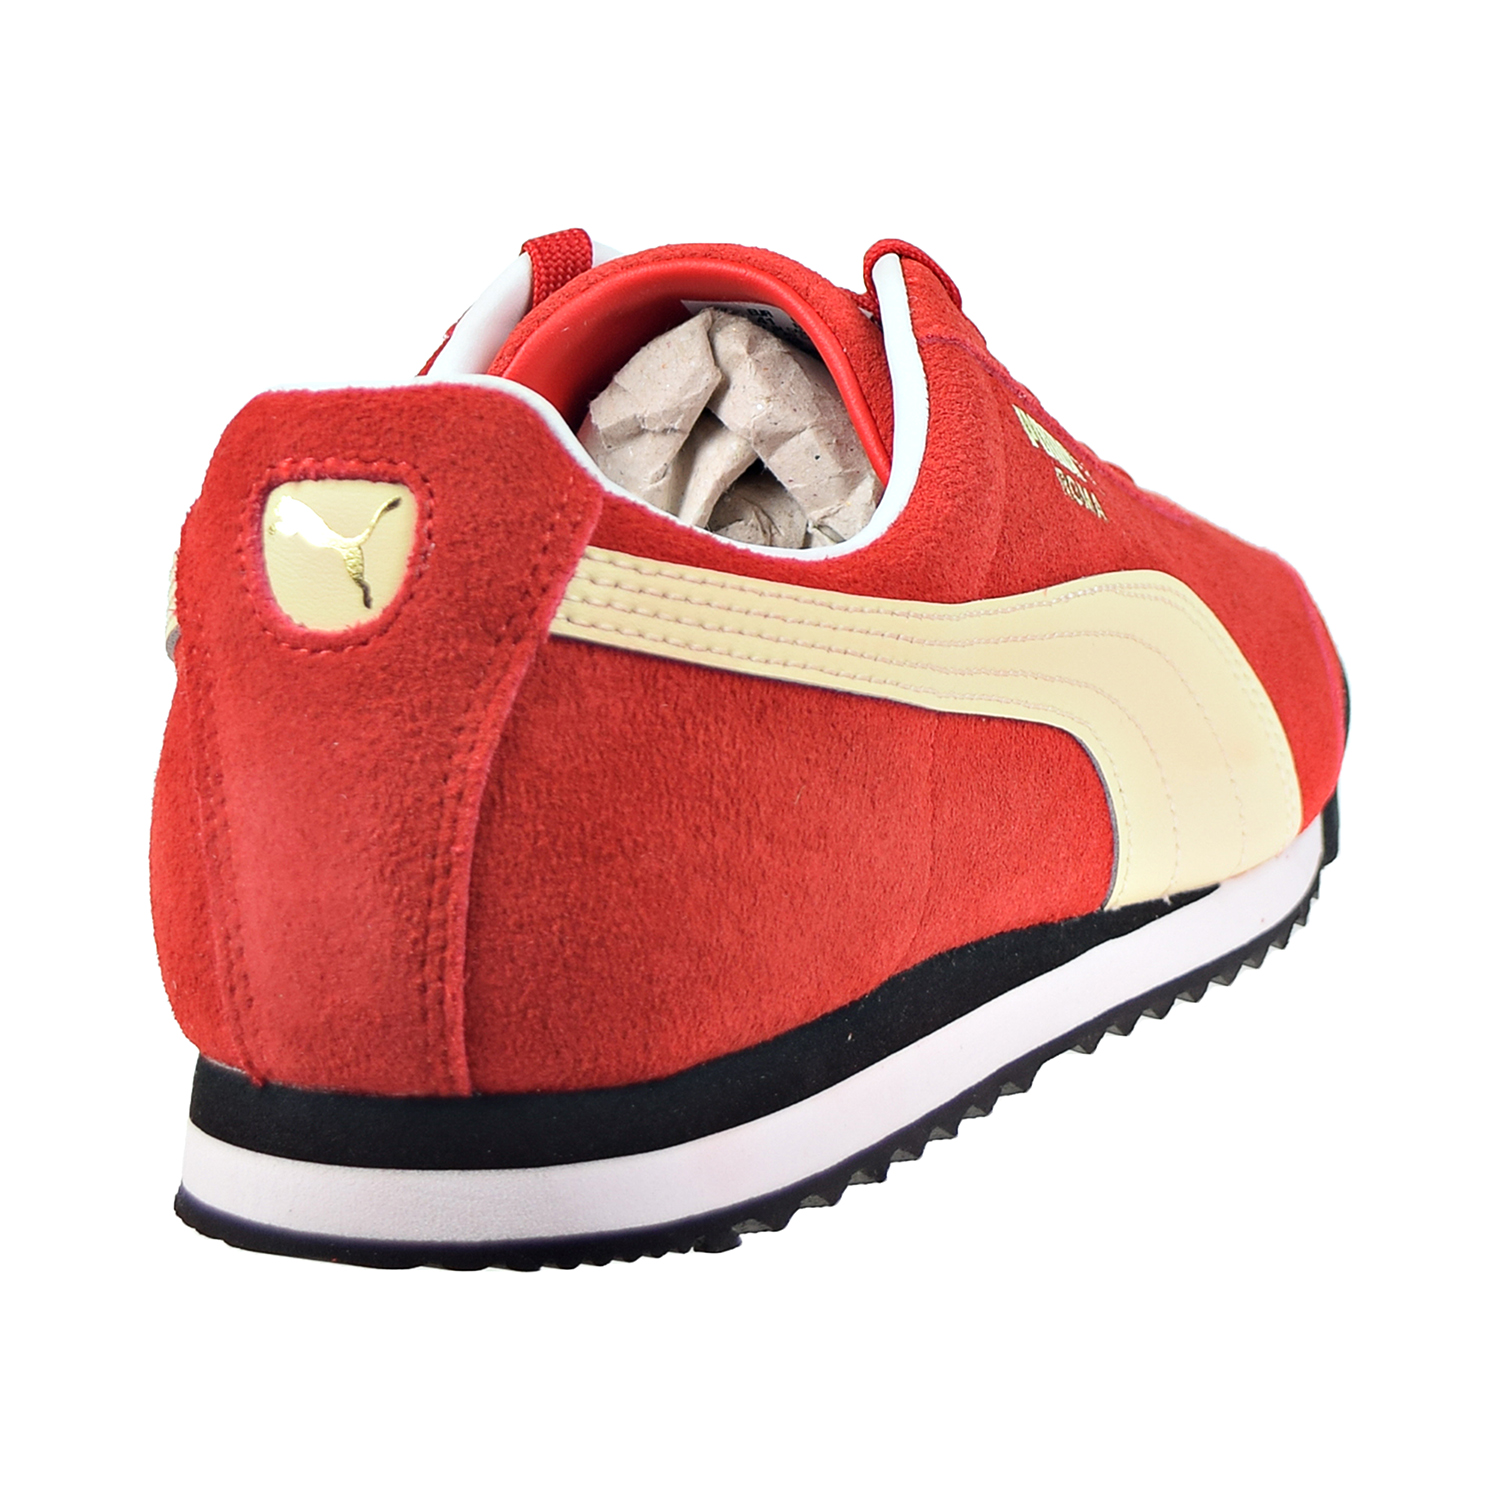 Puma Roma Suede Men's Shoes High Risk Red/Summer Melon 365437-13 - image 3 of 6